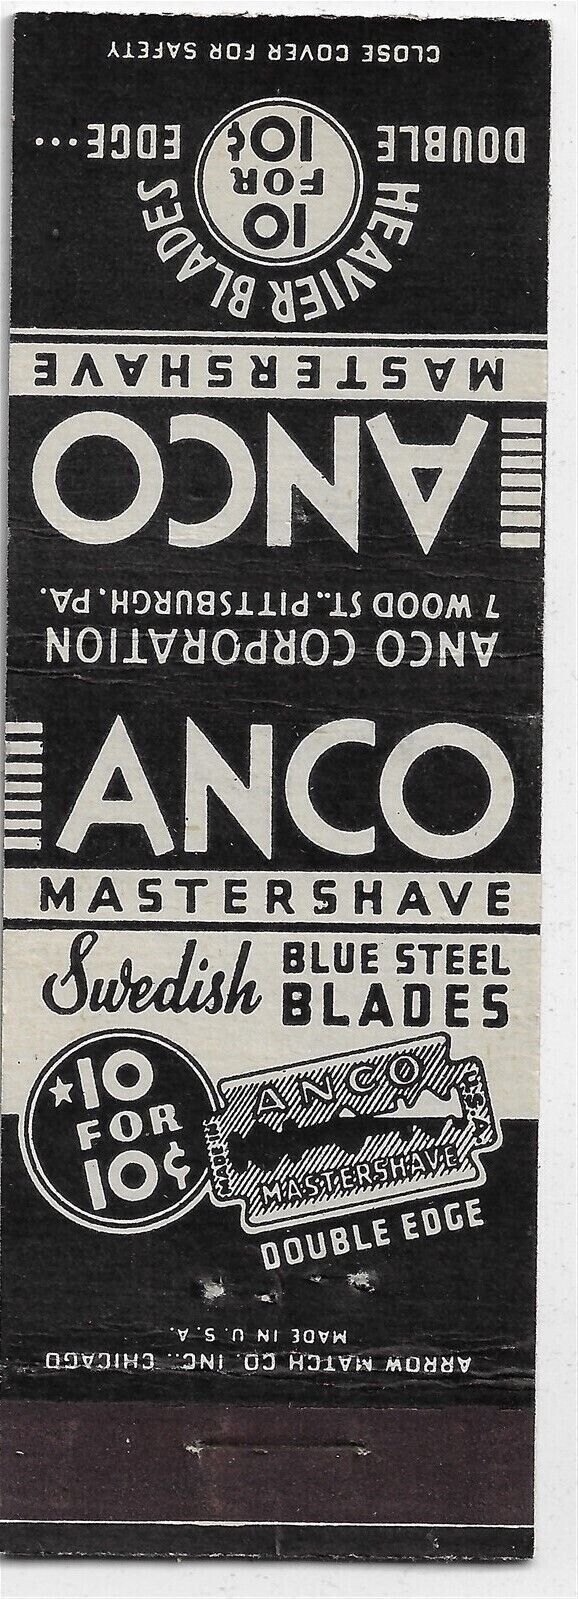 ANCO Master shave Swedish Blue Steel Blades 10 for 10 Cents Empty Matchcover